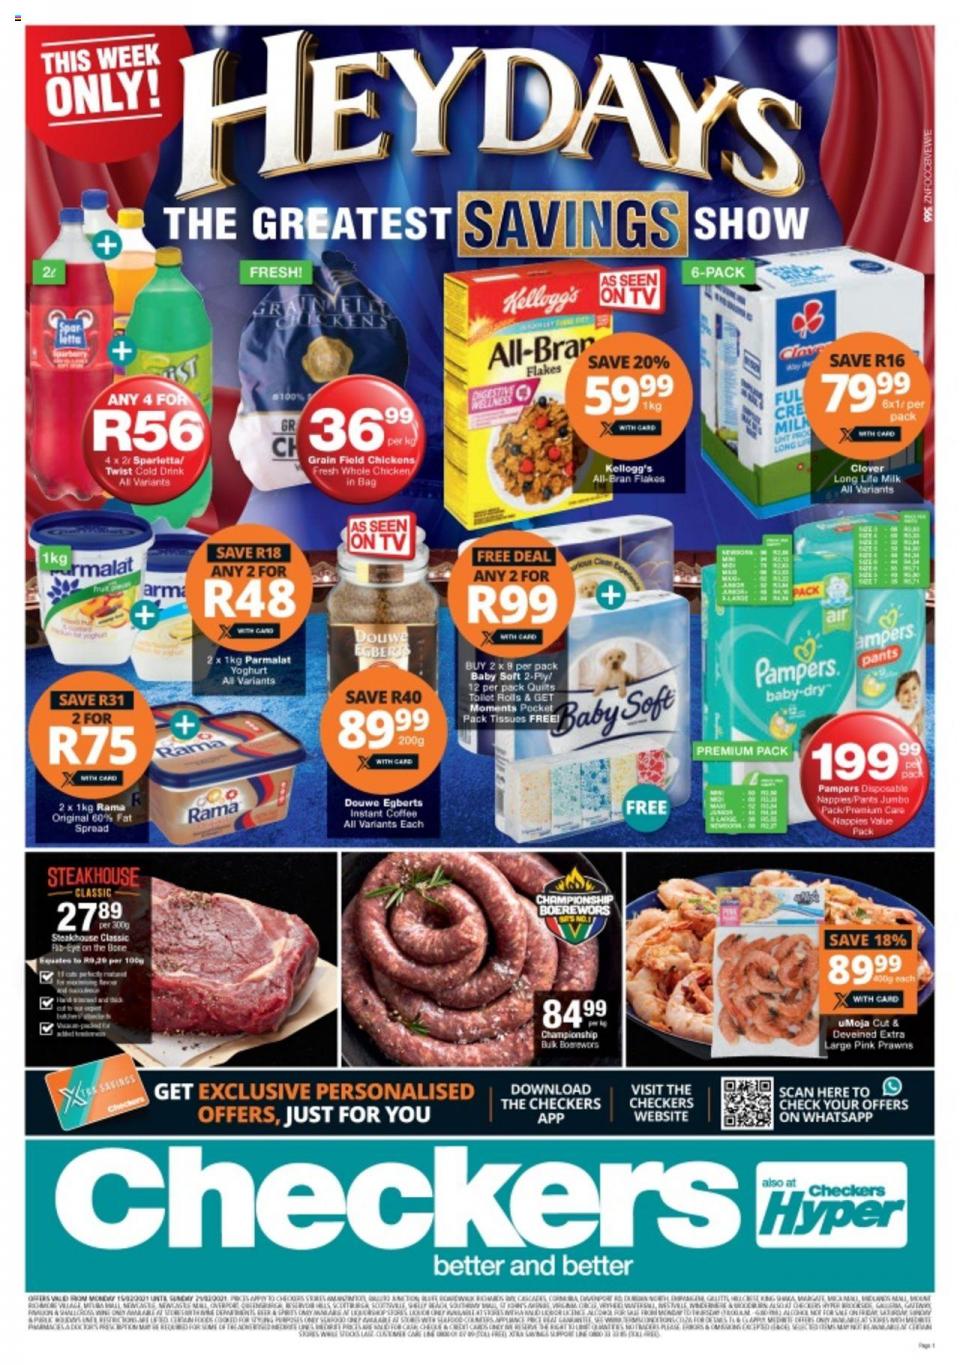 Checkers Specials Heydays Promotion 15 February 2021